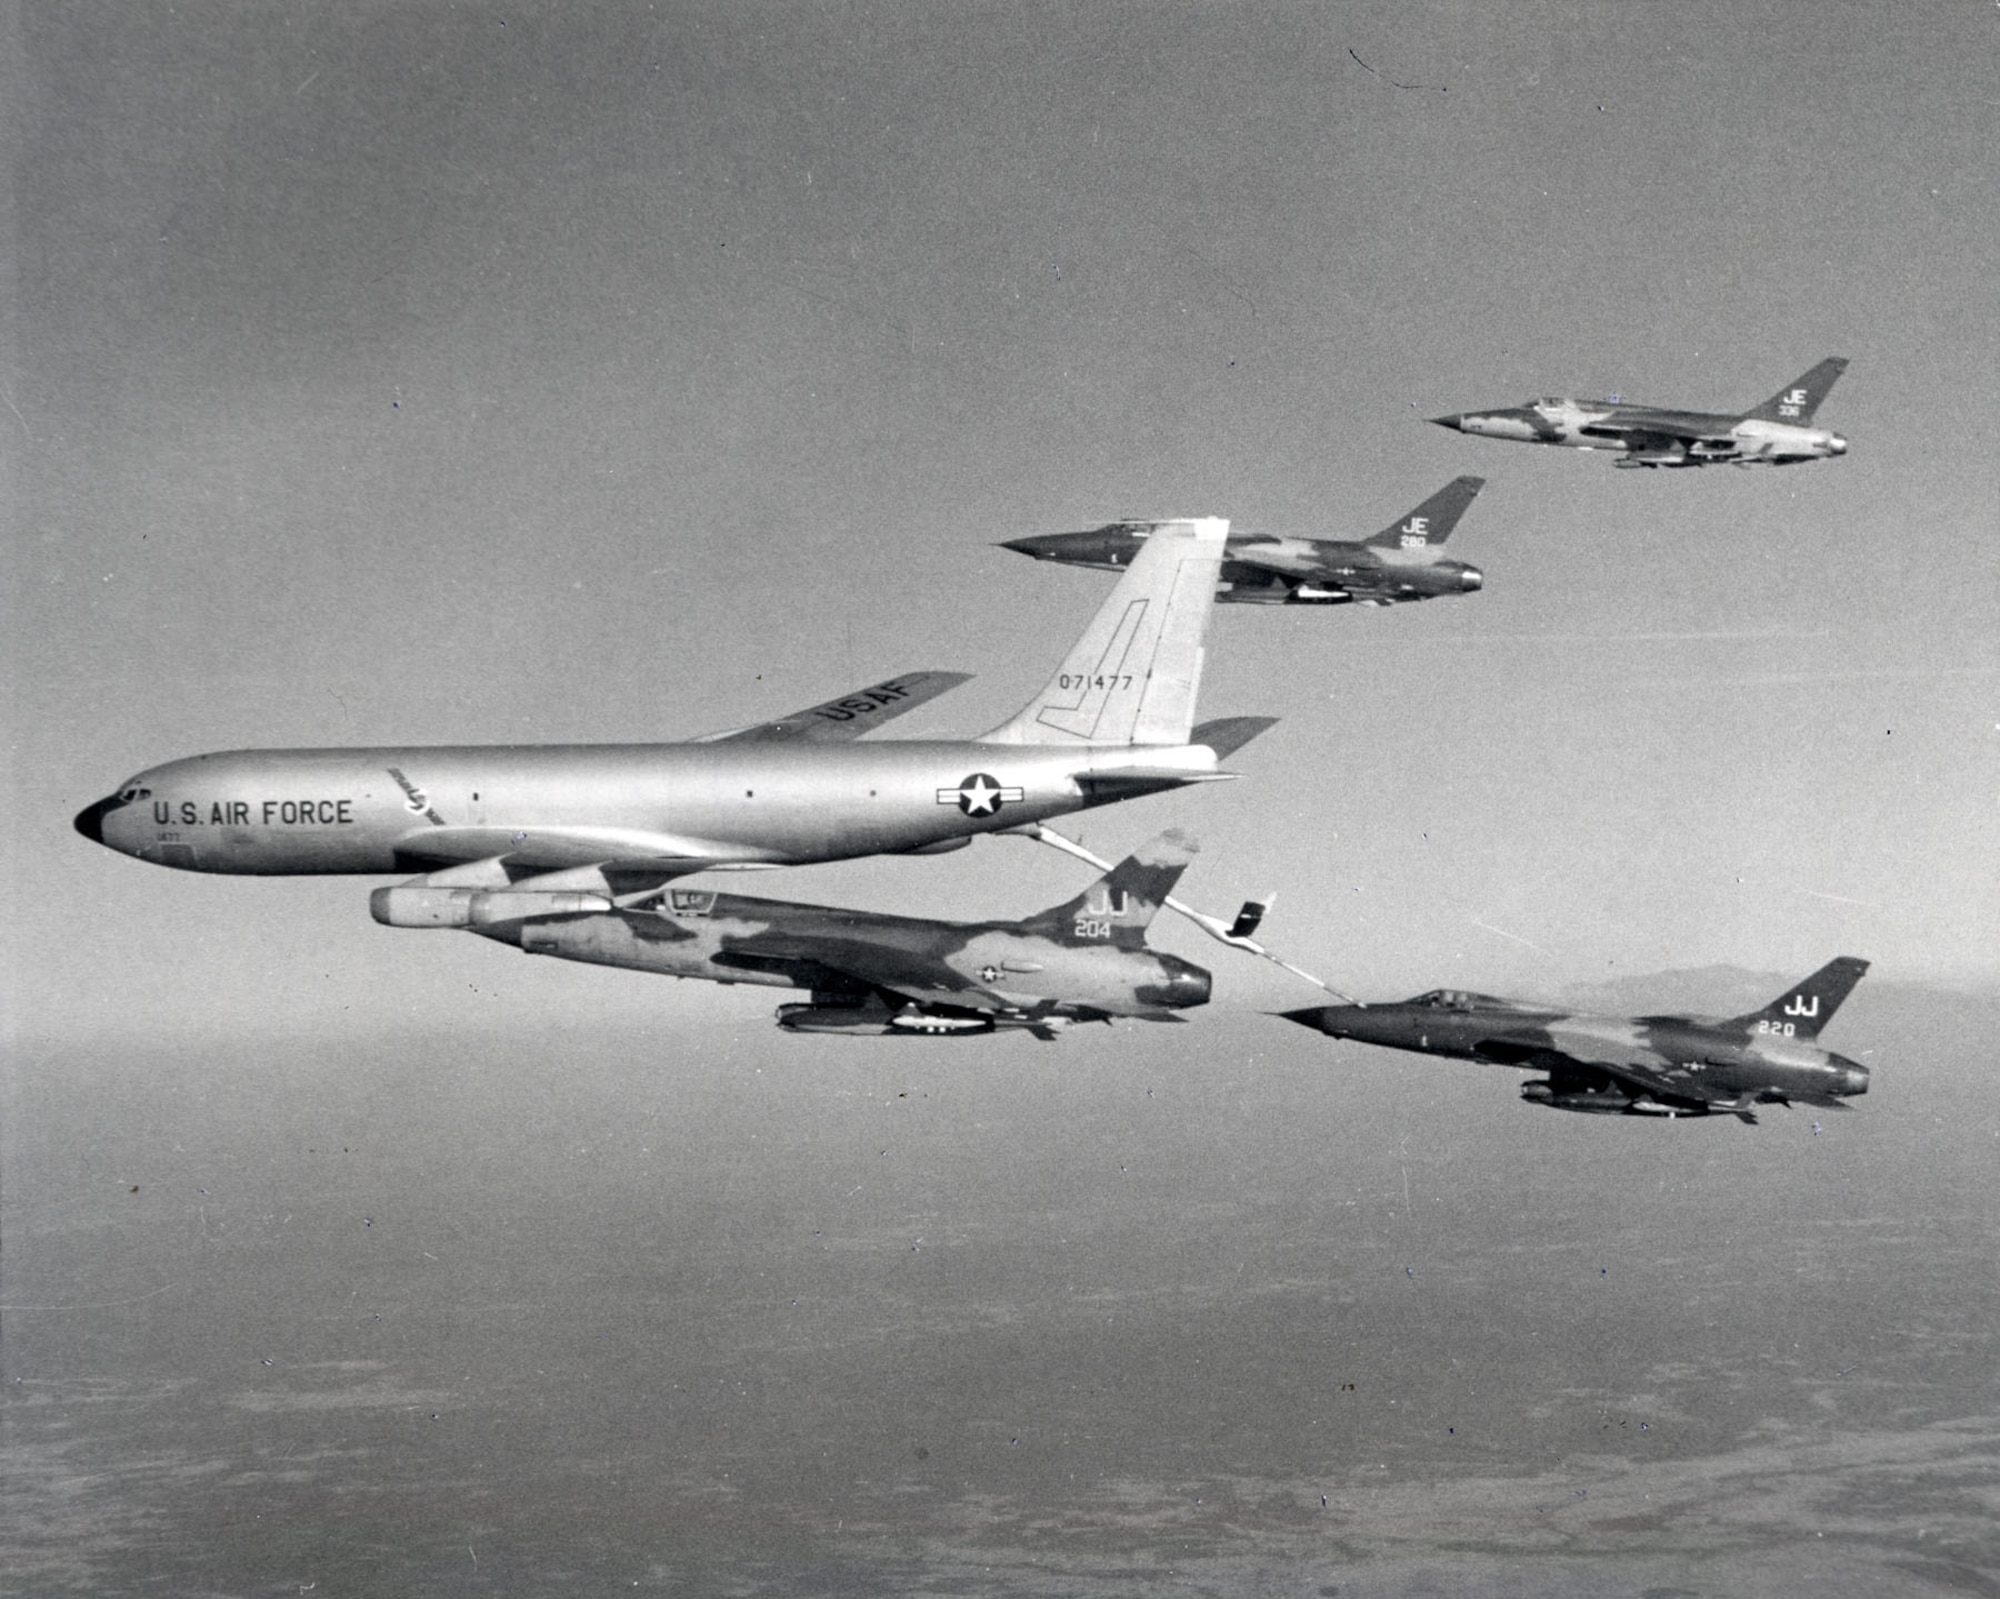 Tankers were essential in allowing heavy fighter-bombers to reach North Vietnamese targets and return. (U.S. Air Force photo)